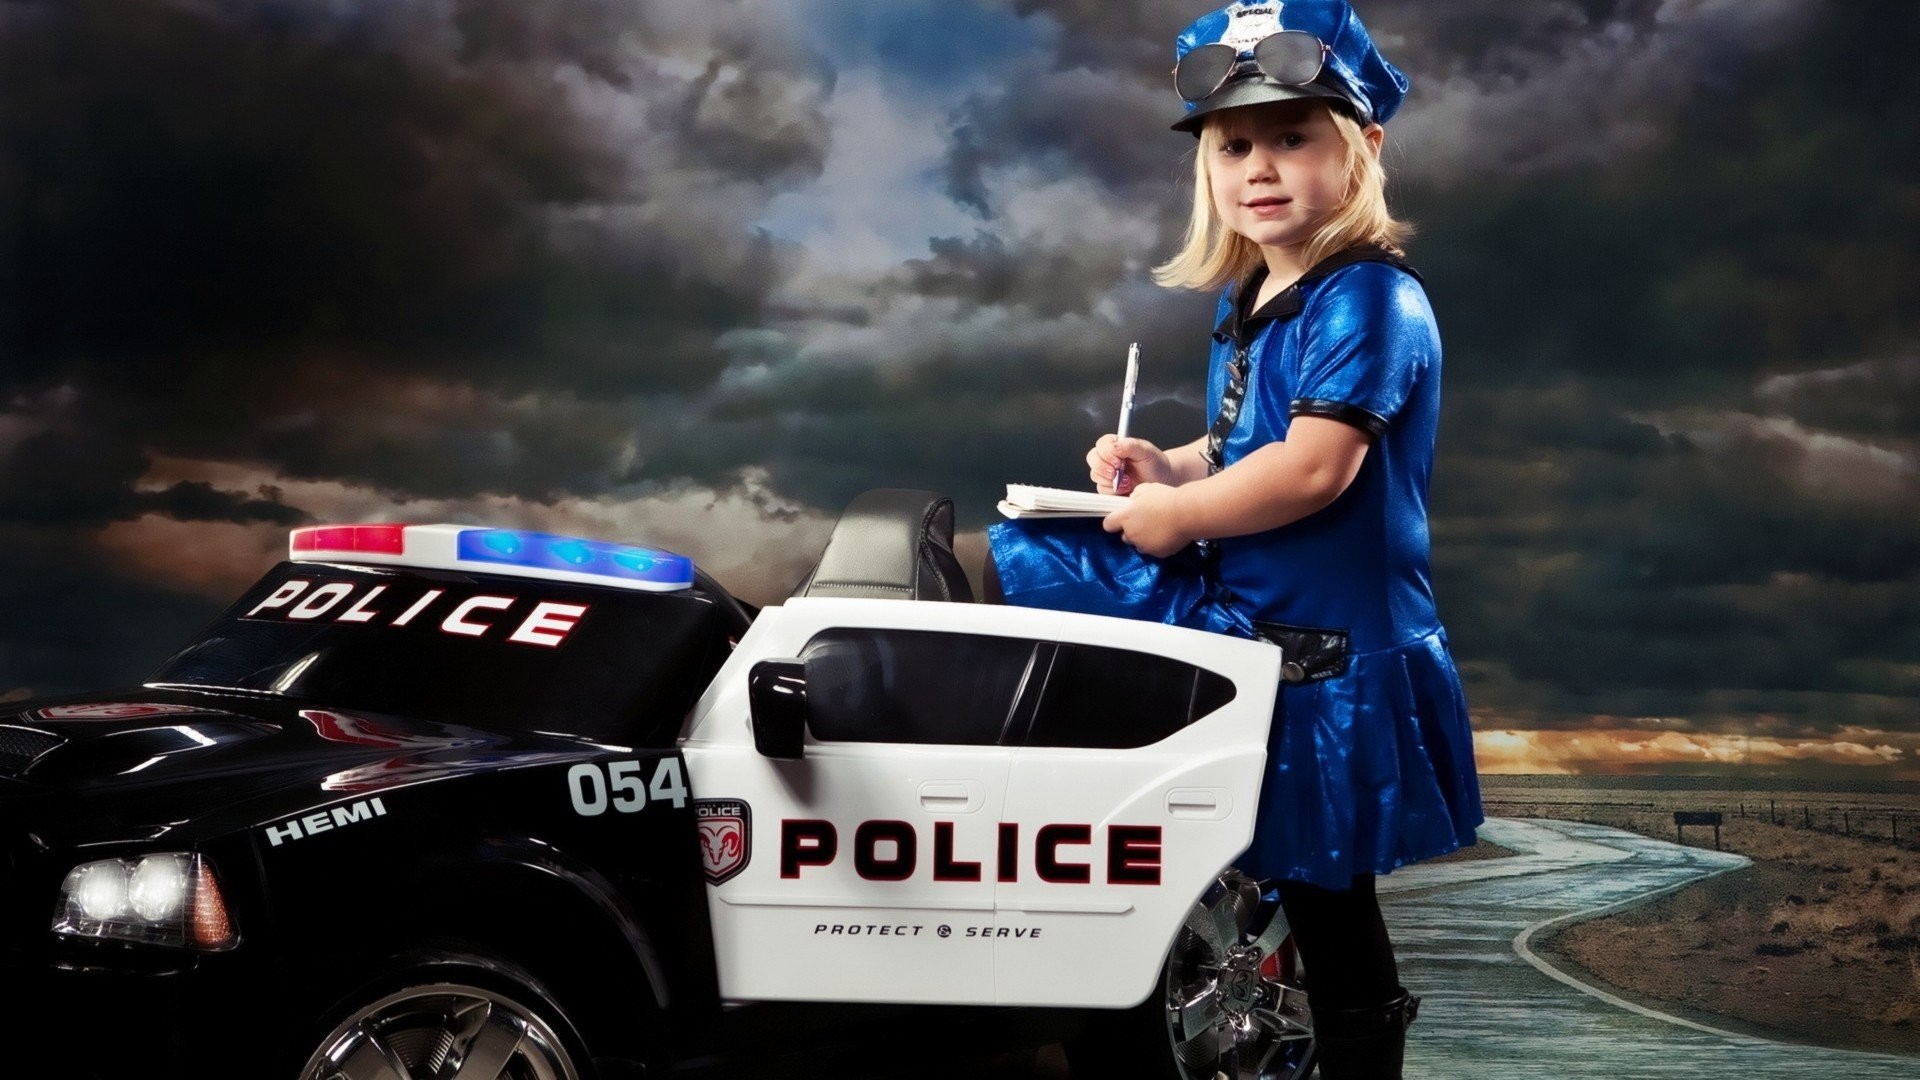 Women police funny police cars wallpaper | | 252101 | WallpaperUP